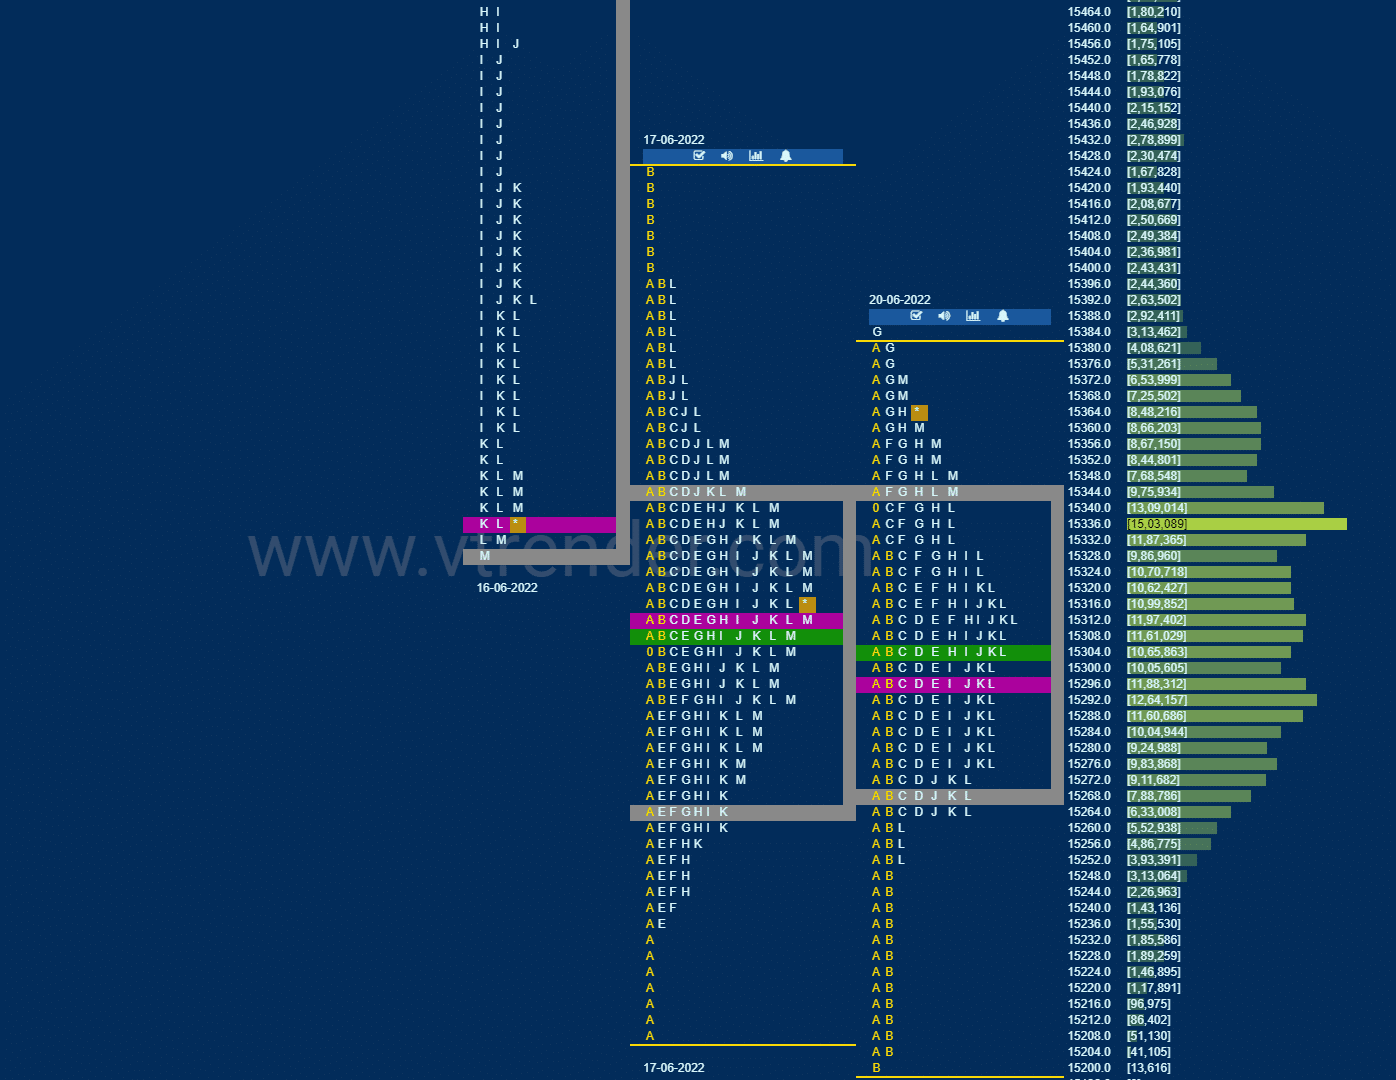 Nf 14 Market Profile Analysis Dated 20Th Jun 2022 Banknifty Futures, Charts, Day Trading, Intraday Trading, Intraday Trading Strategies, Market Profile, Market Profile Trading Strategies, Nifty Futures, Order Flow Analysis, Support And Resistance, Technical Analysis, Trading Strategies, Volume Profile Trading